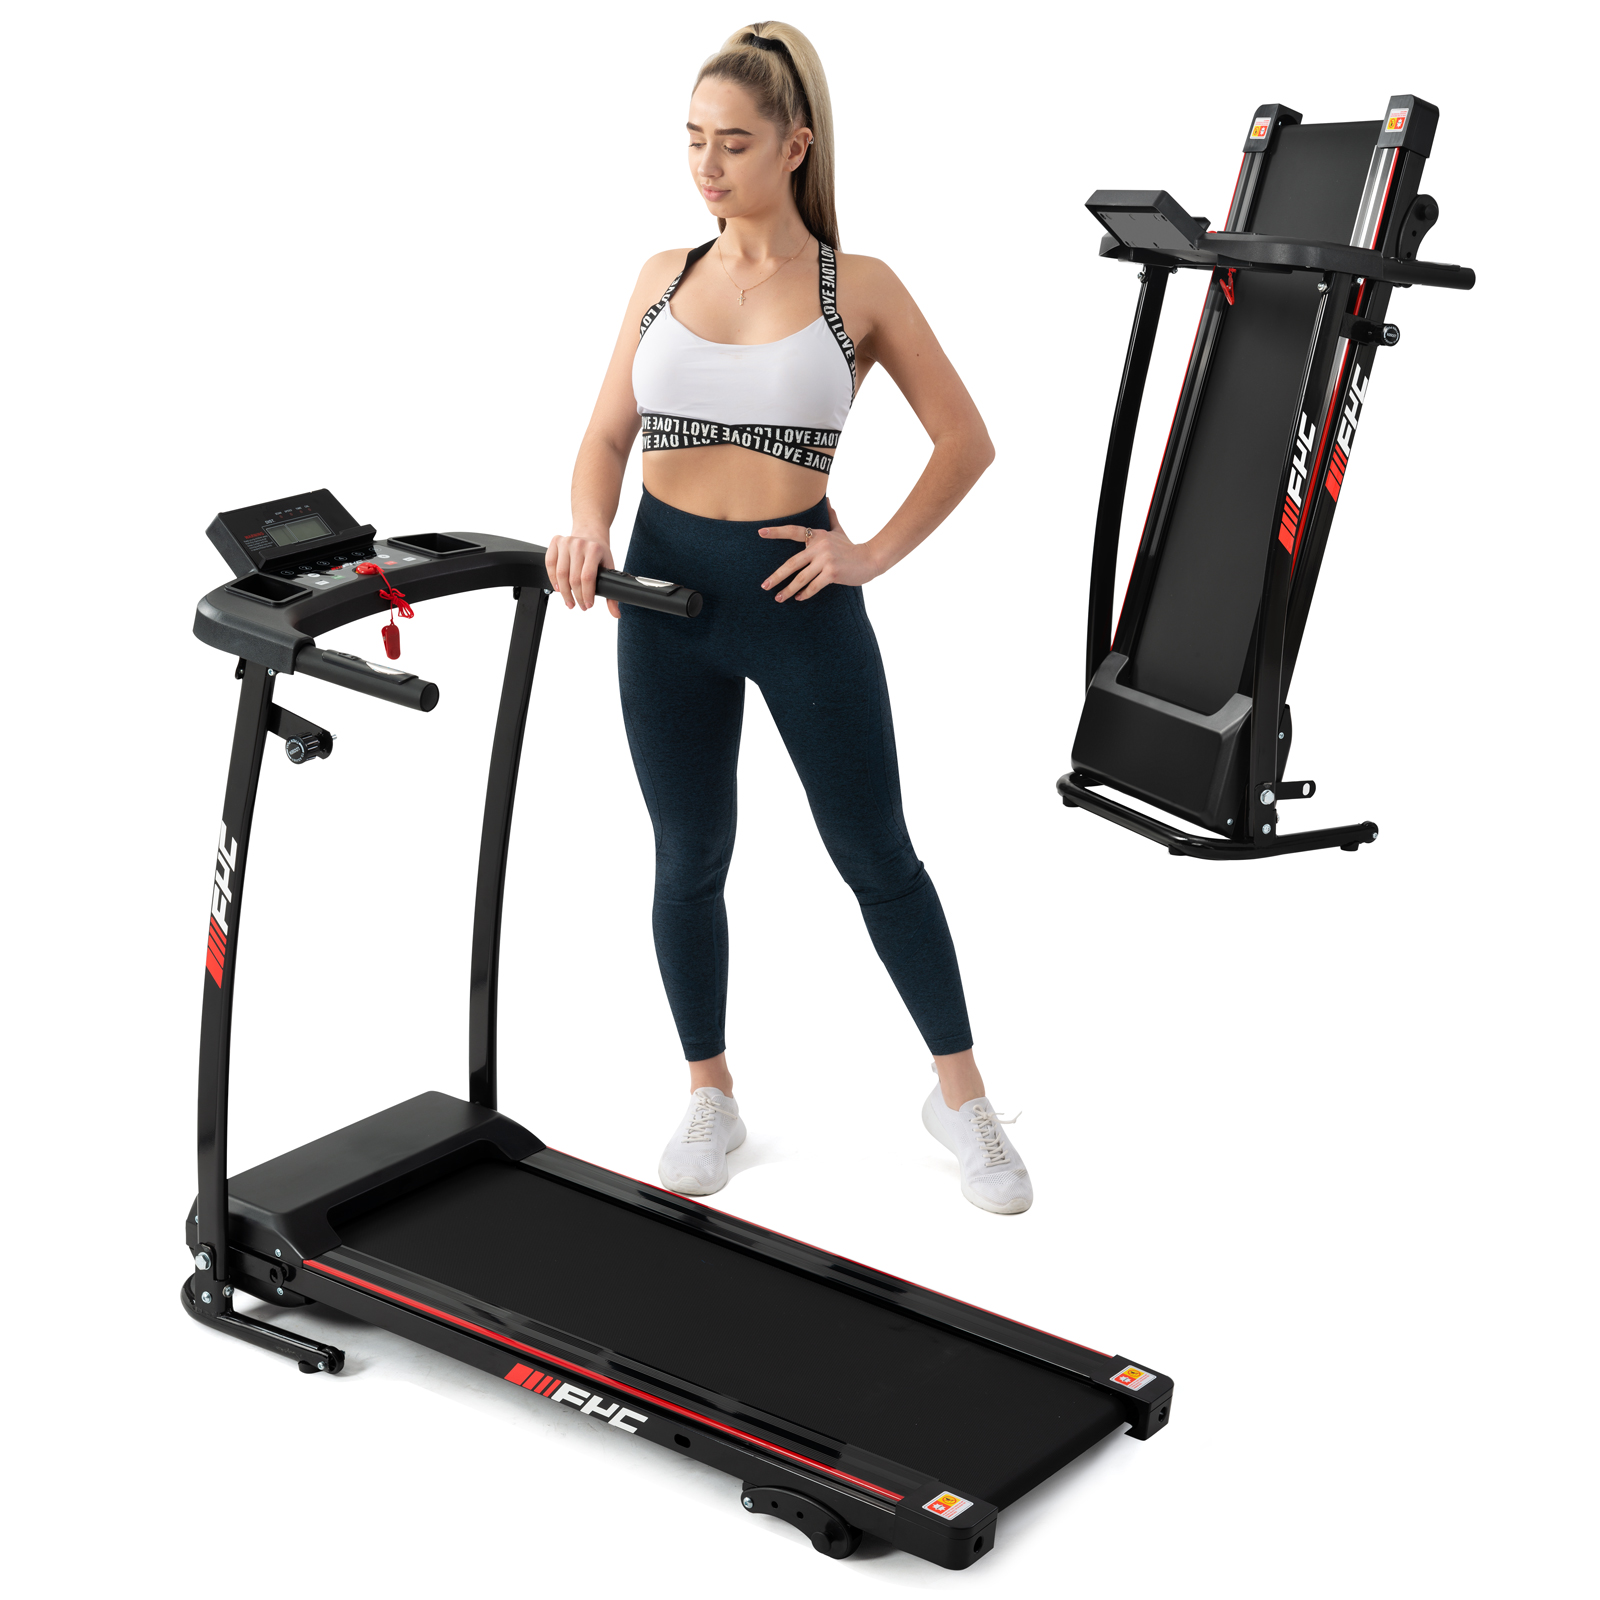 FYC Folding Treadmill for Home Portable Electric Motorized Treadmill Running Exercise Machine Compact Treadmill for Home Gym Fitness Workout Jogging Walking-Boyel Living